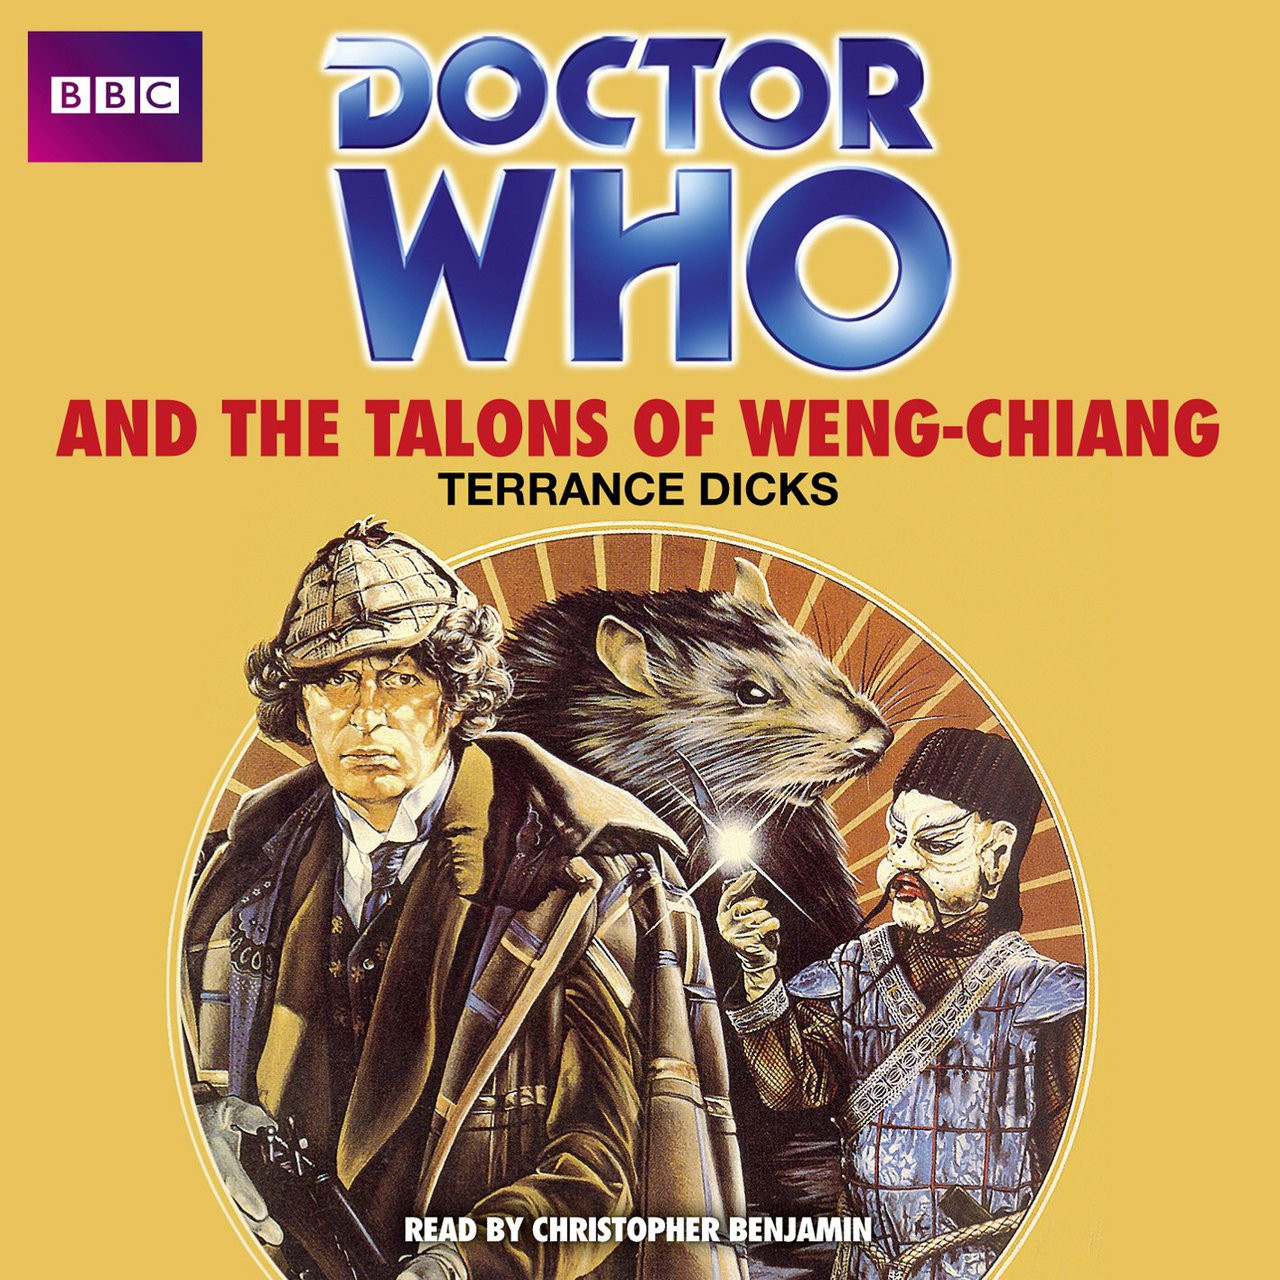 Doctor Who and The TALONS OF WENG-CHIANG - BBC Audio Book (4 CD Set) Read  by Christopher Benjamin